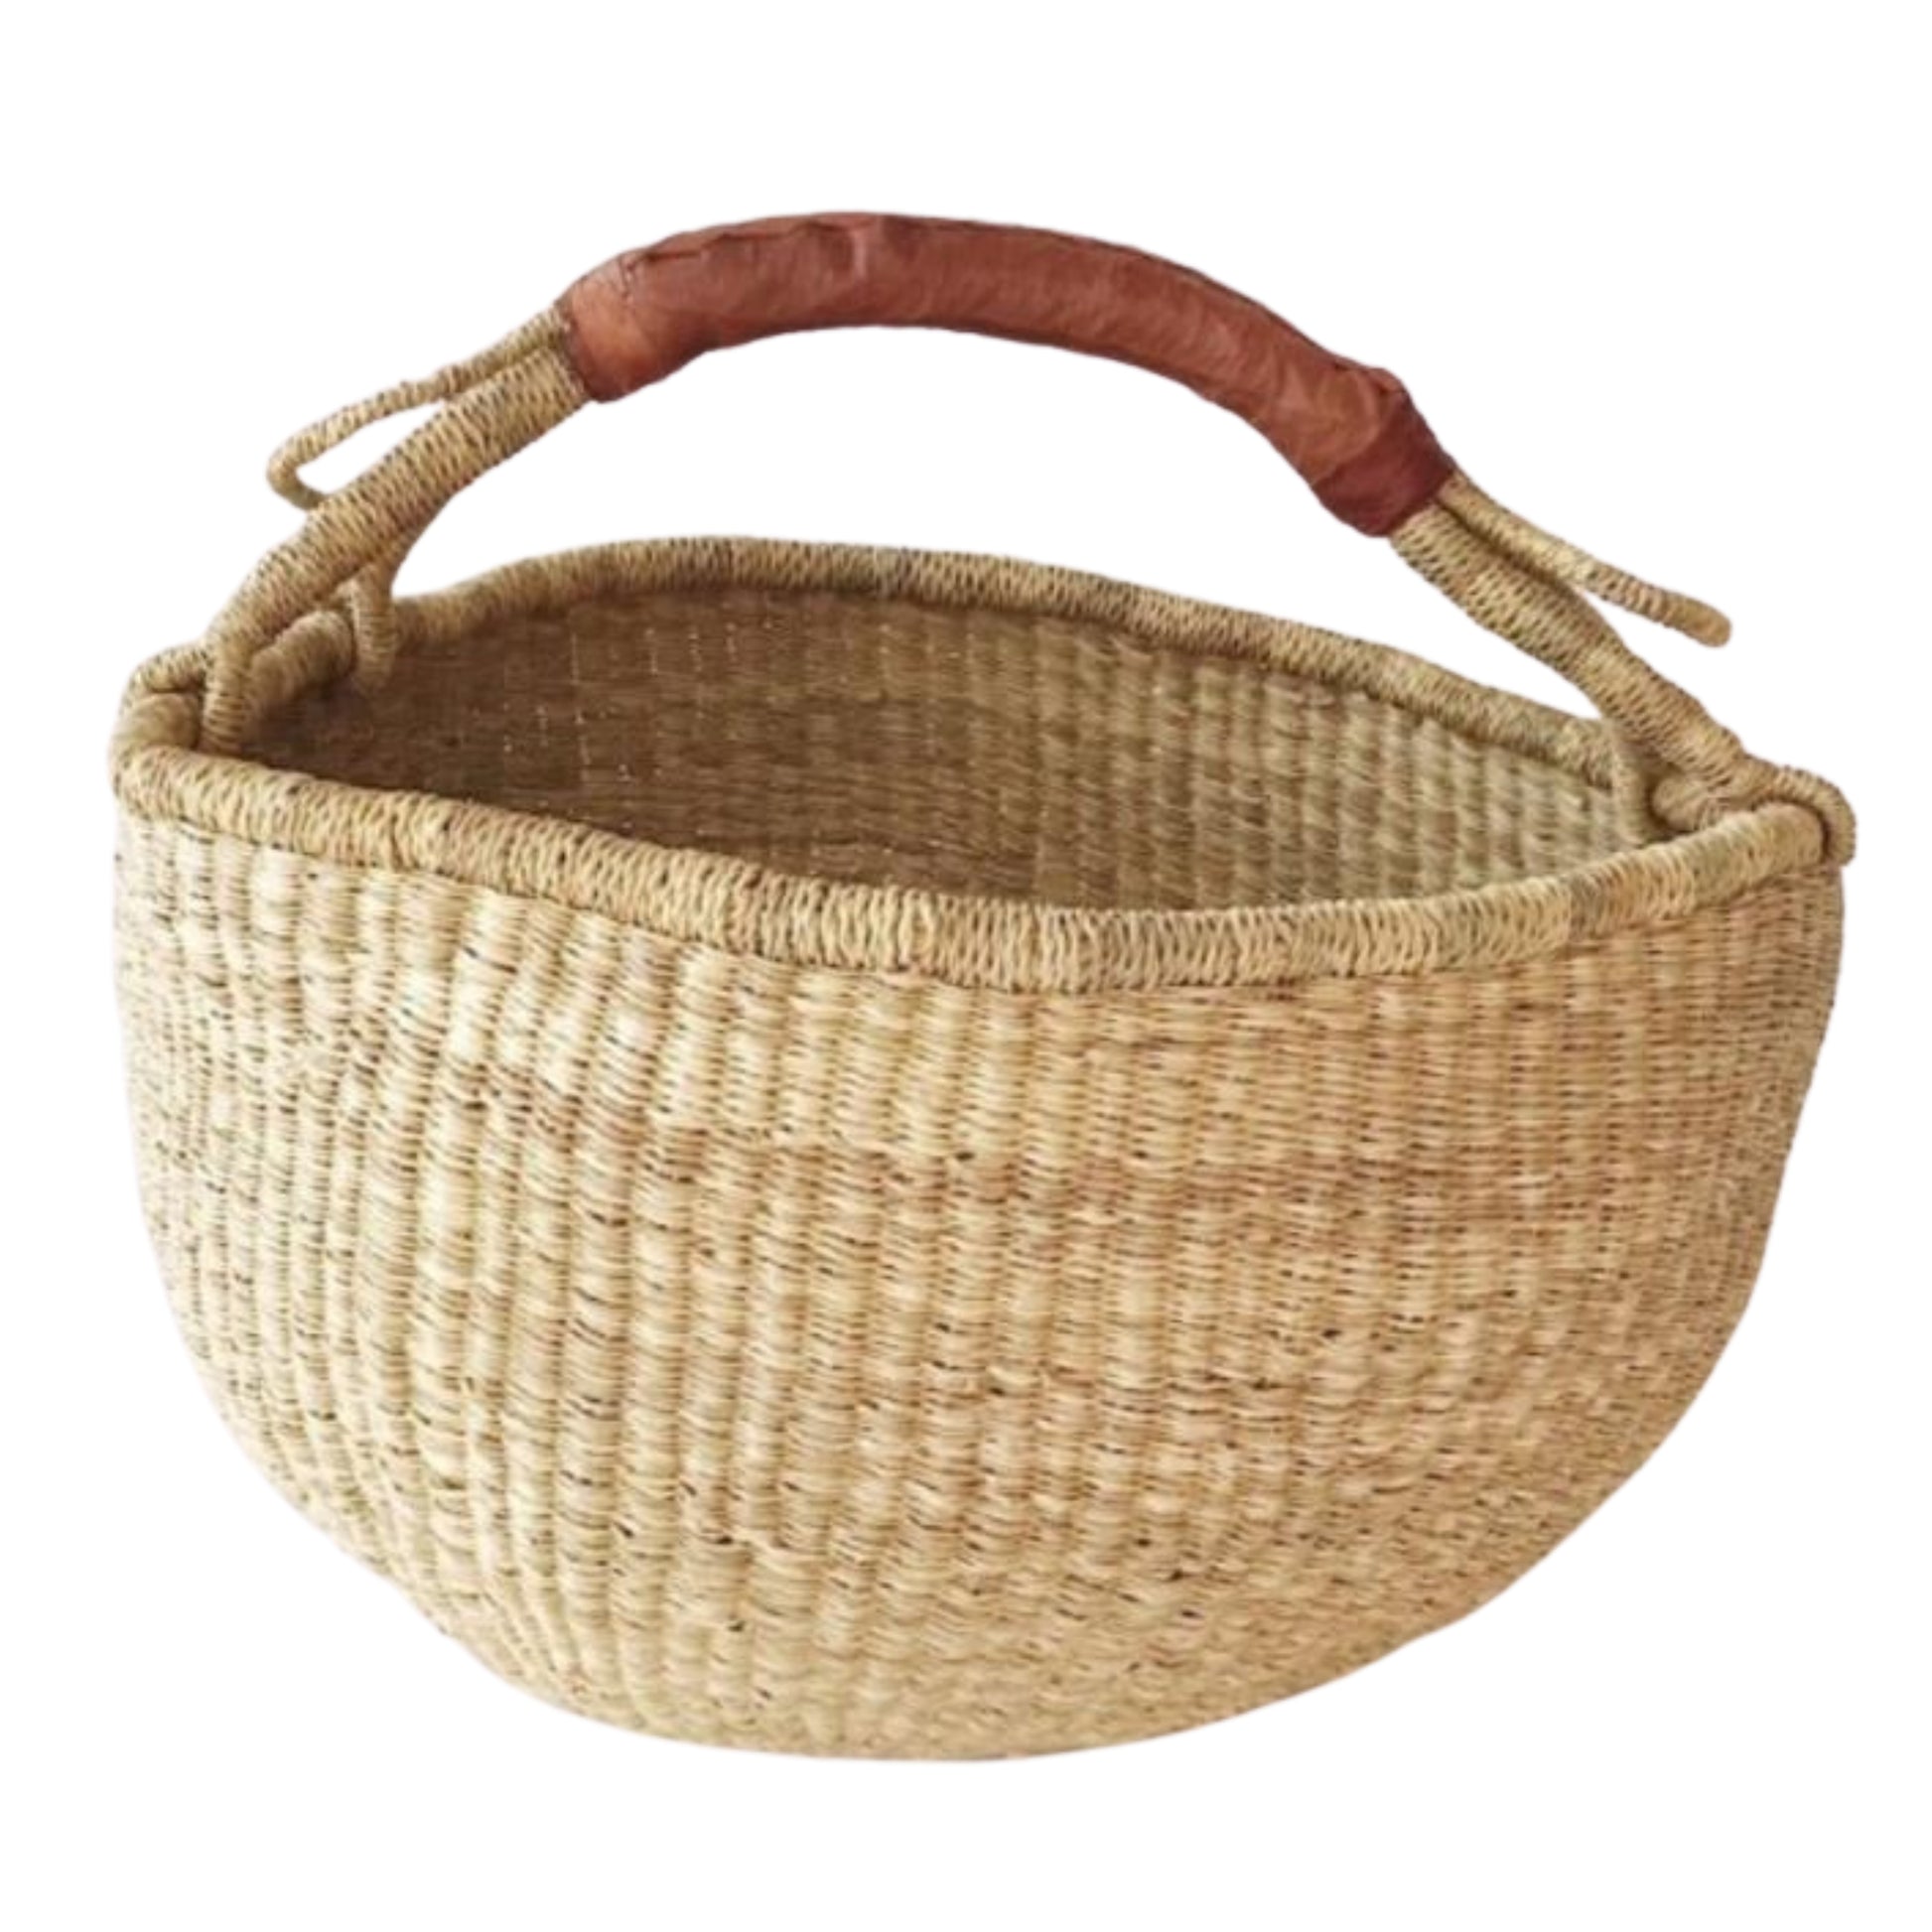 15-inch handwoven Bolga basket in natural color with leather handle